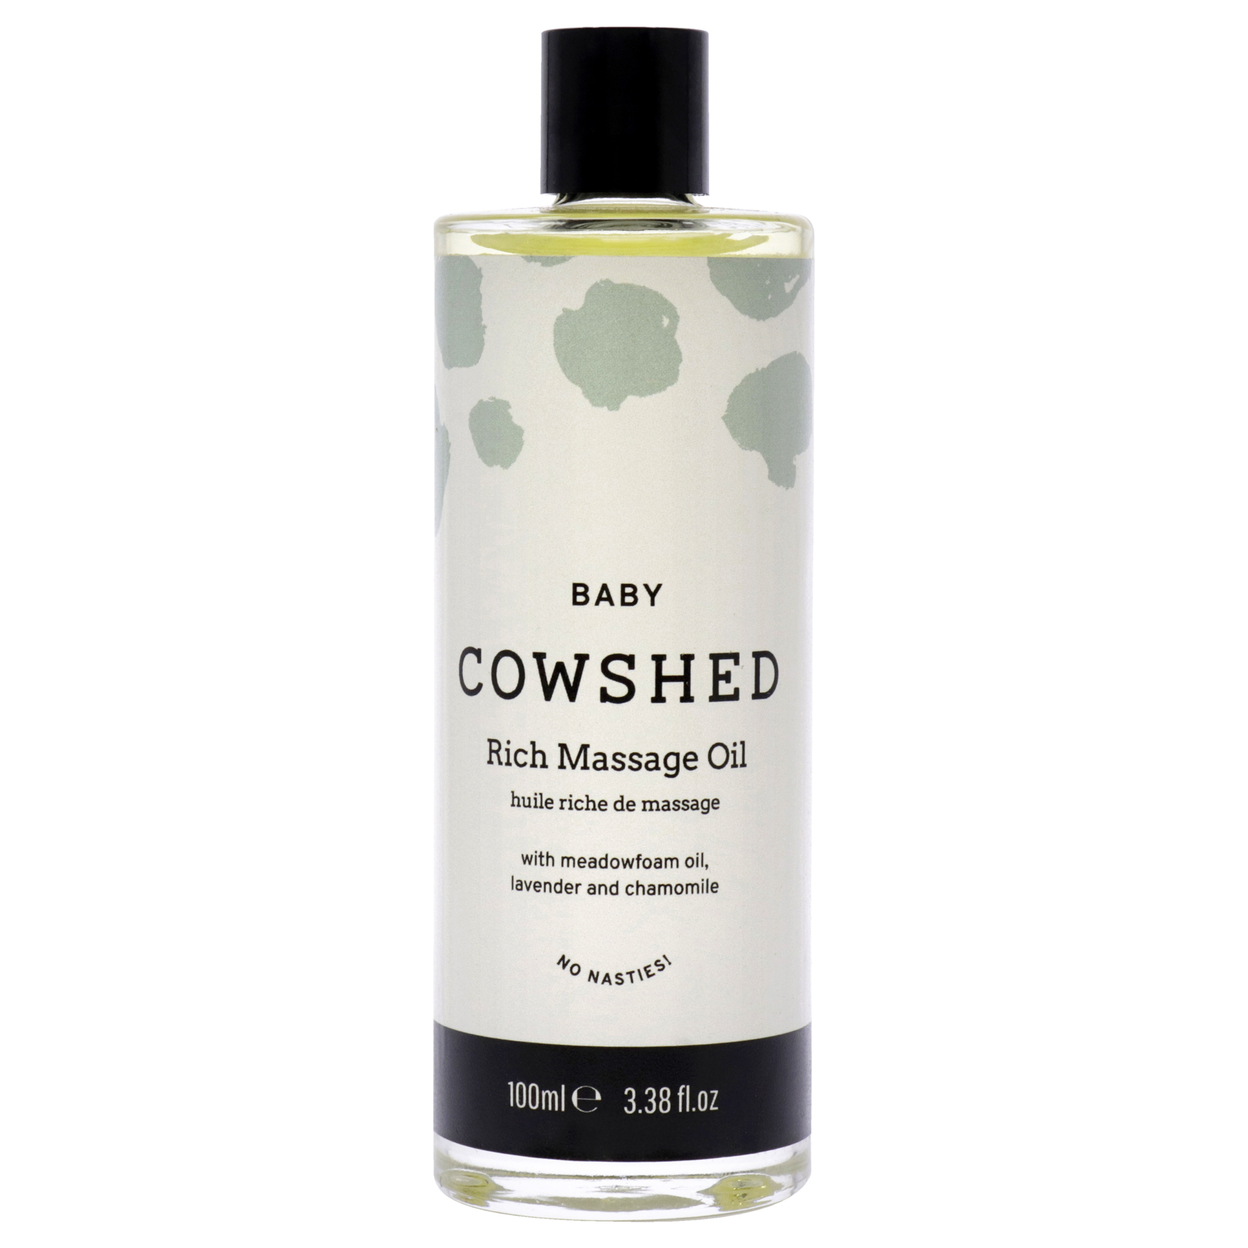 Cowshed Baby Rich Massage Oil 3.38 Oz